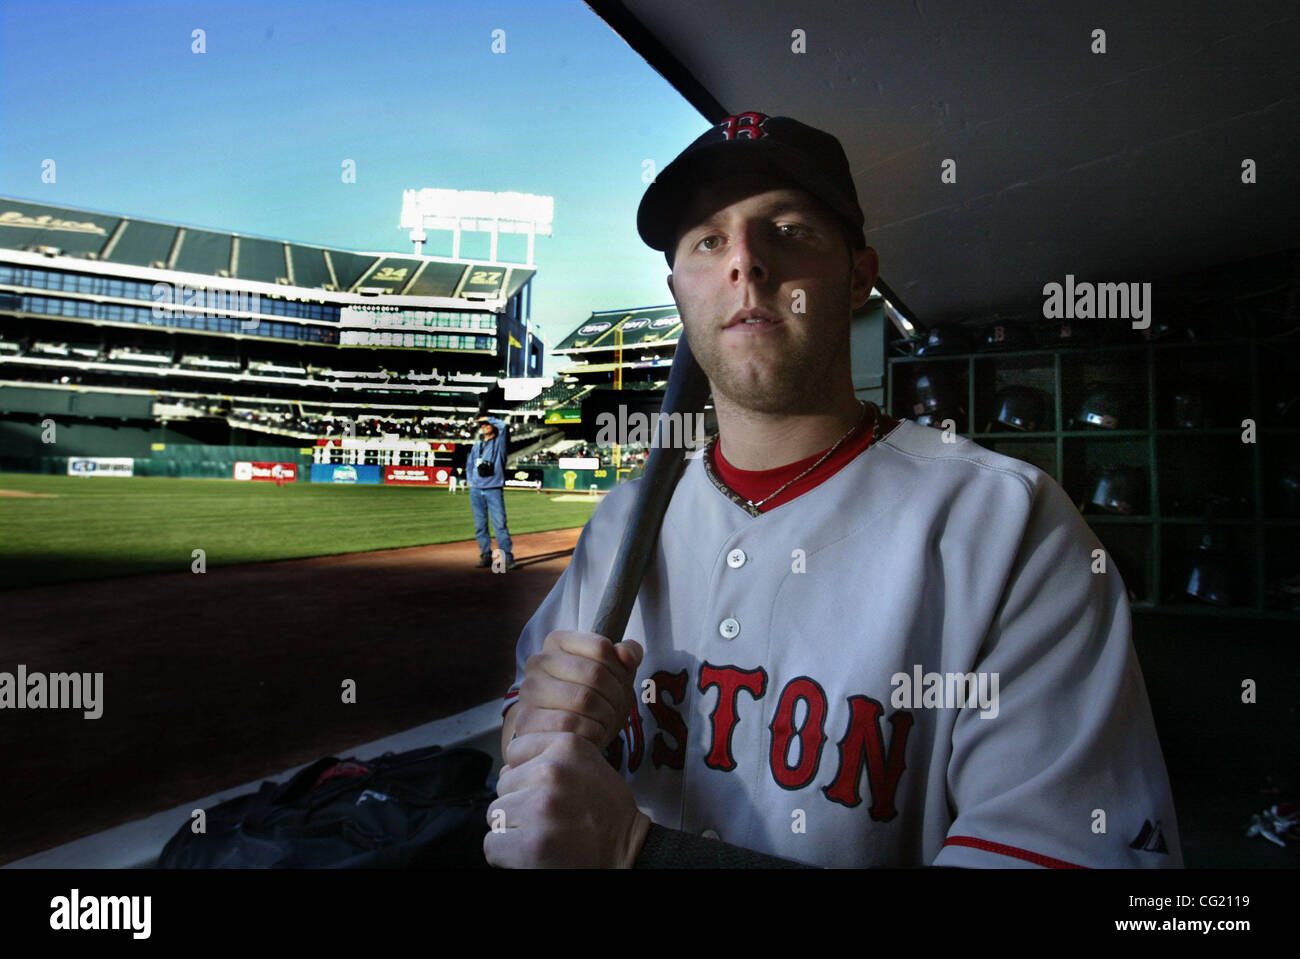 Red Sox second baseman Dustin Pedroia, No. 15 inside the dugout at